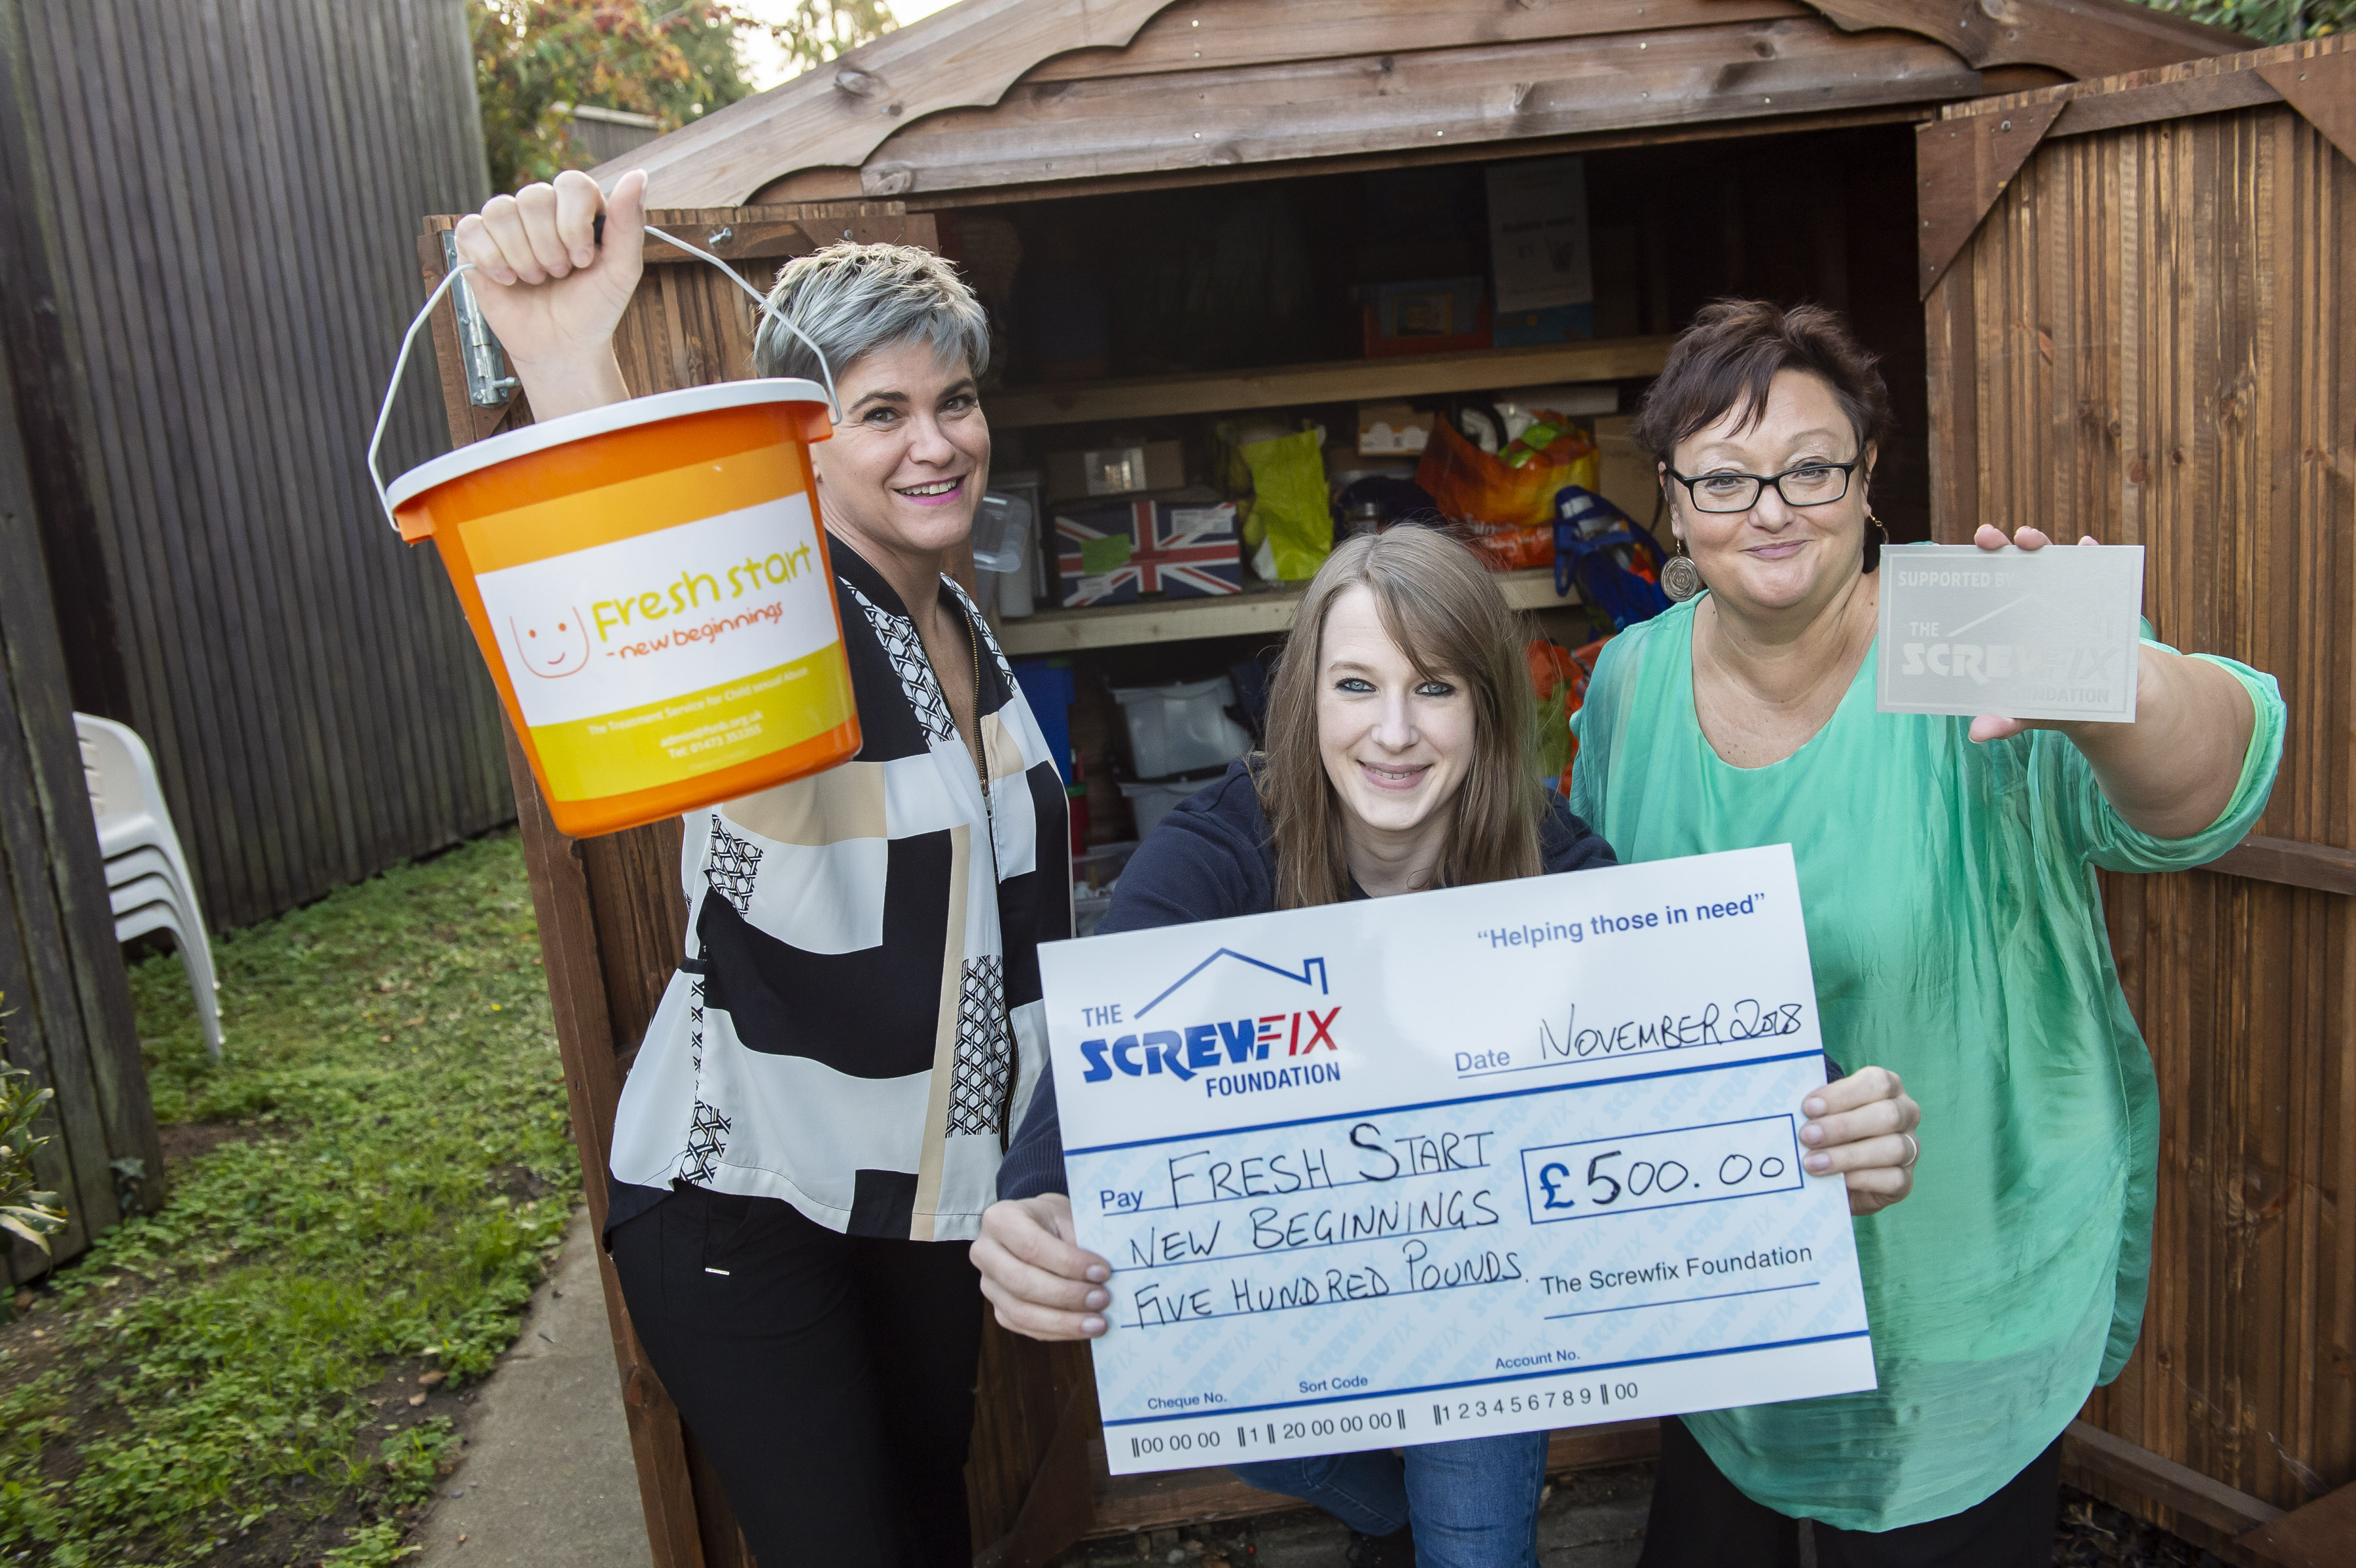 Fresh Start New Beginnings in Ipswich gets a helping hand from the Screwfix Foundation